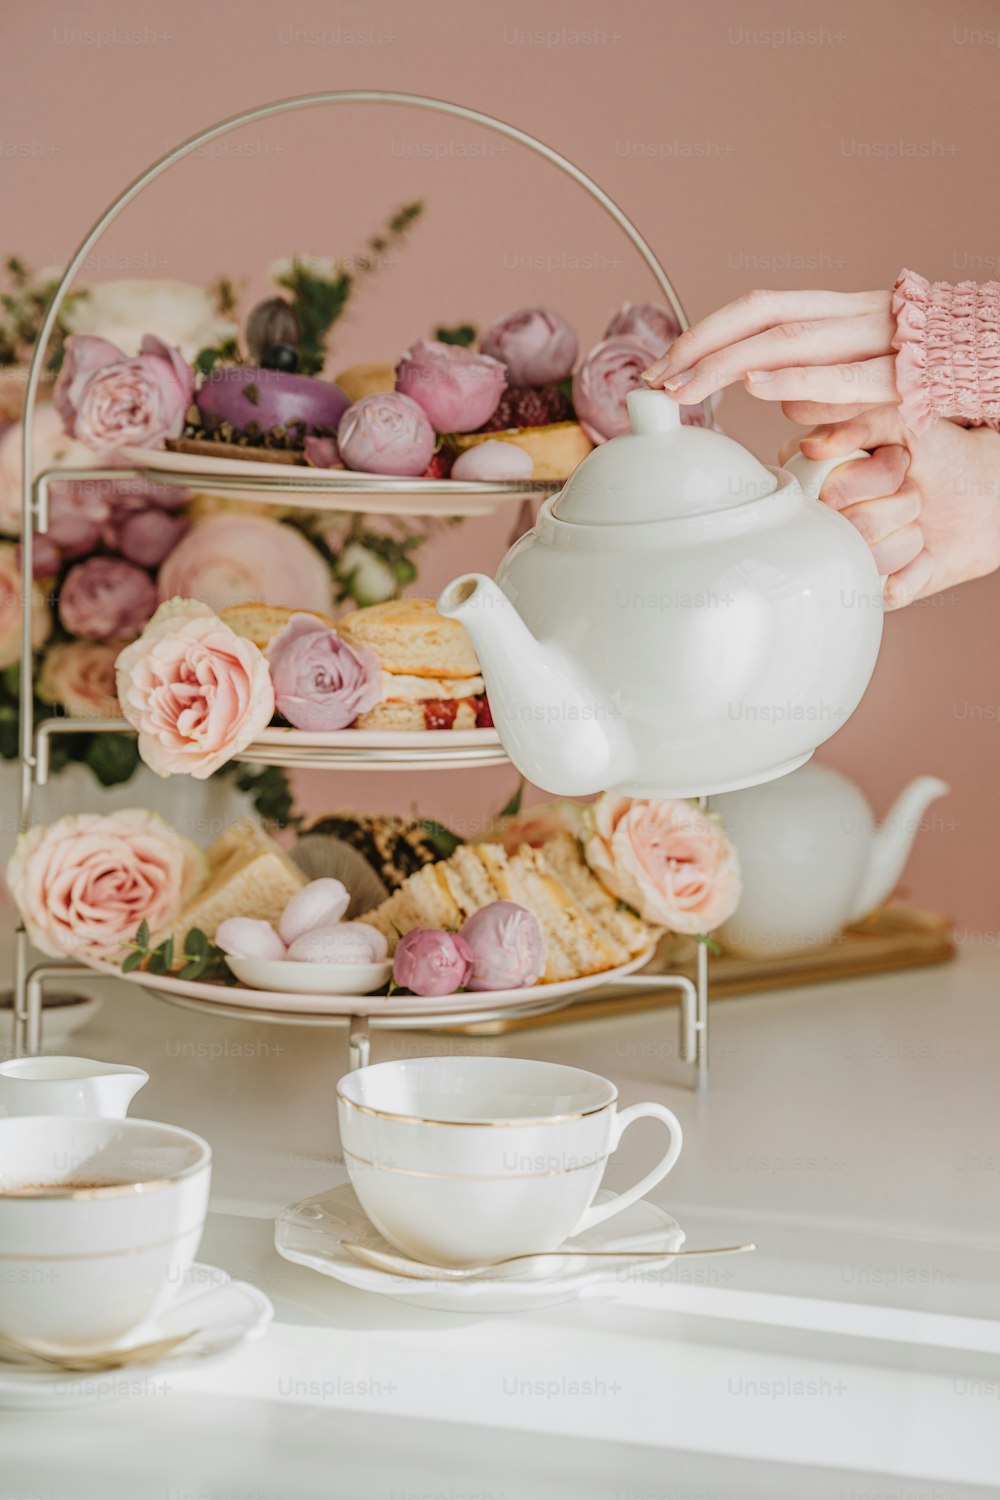 500+ Tea Cup Pictures  Download Free Images on Unsplash